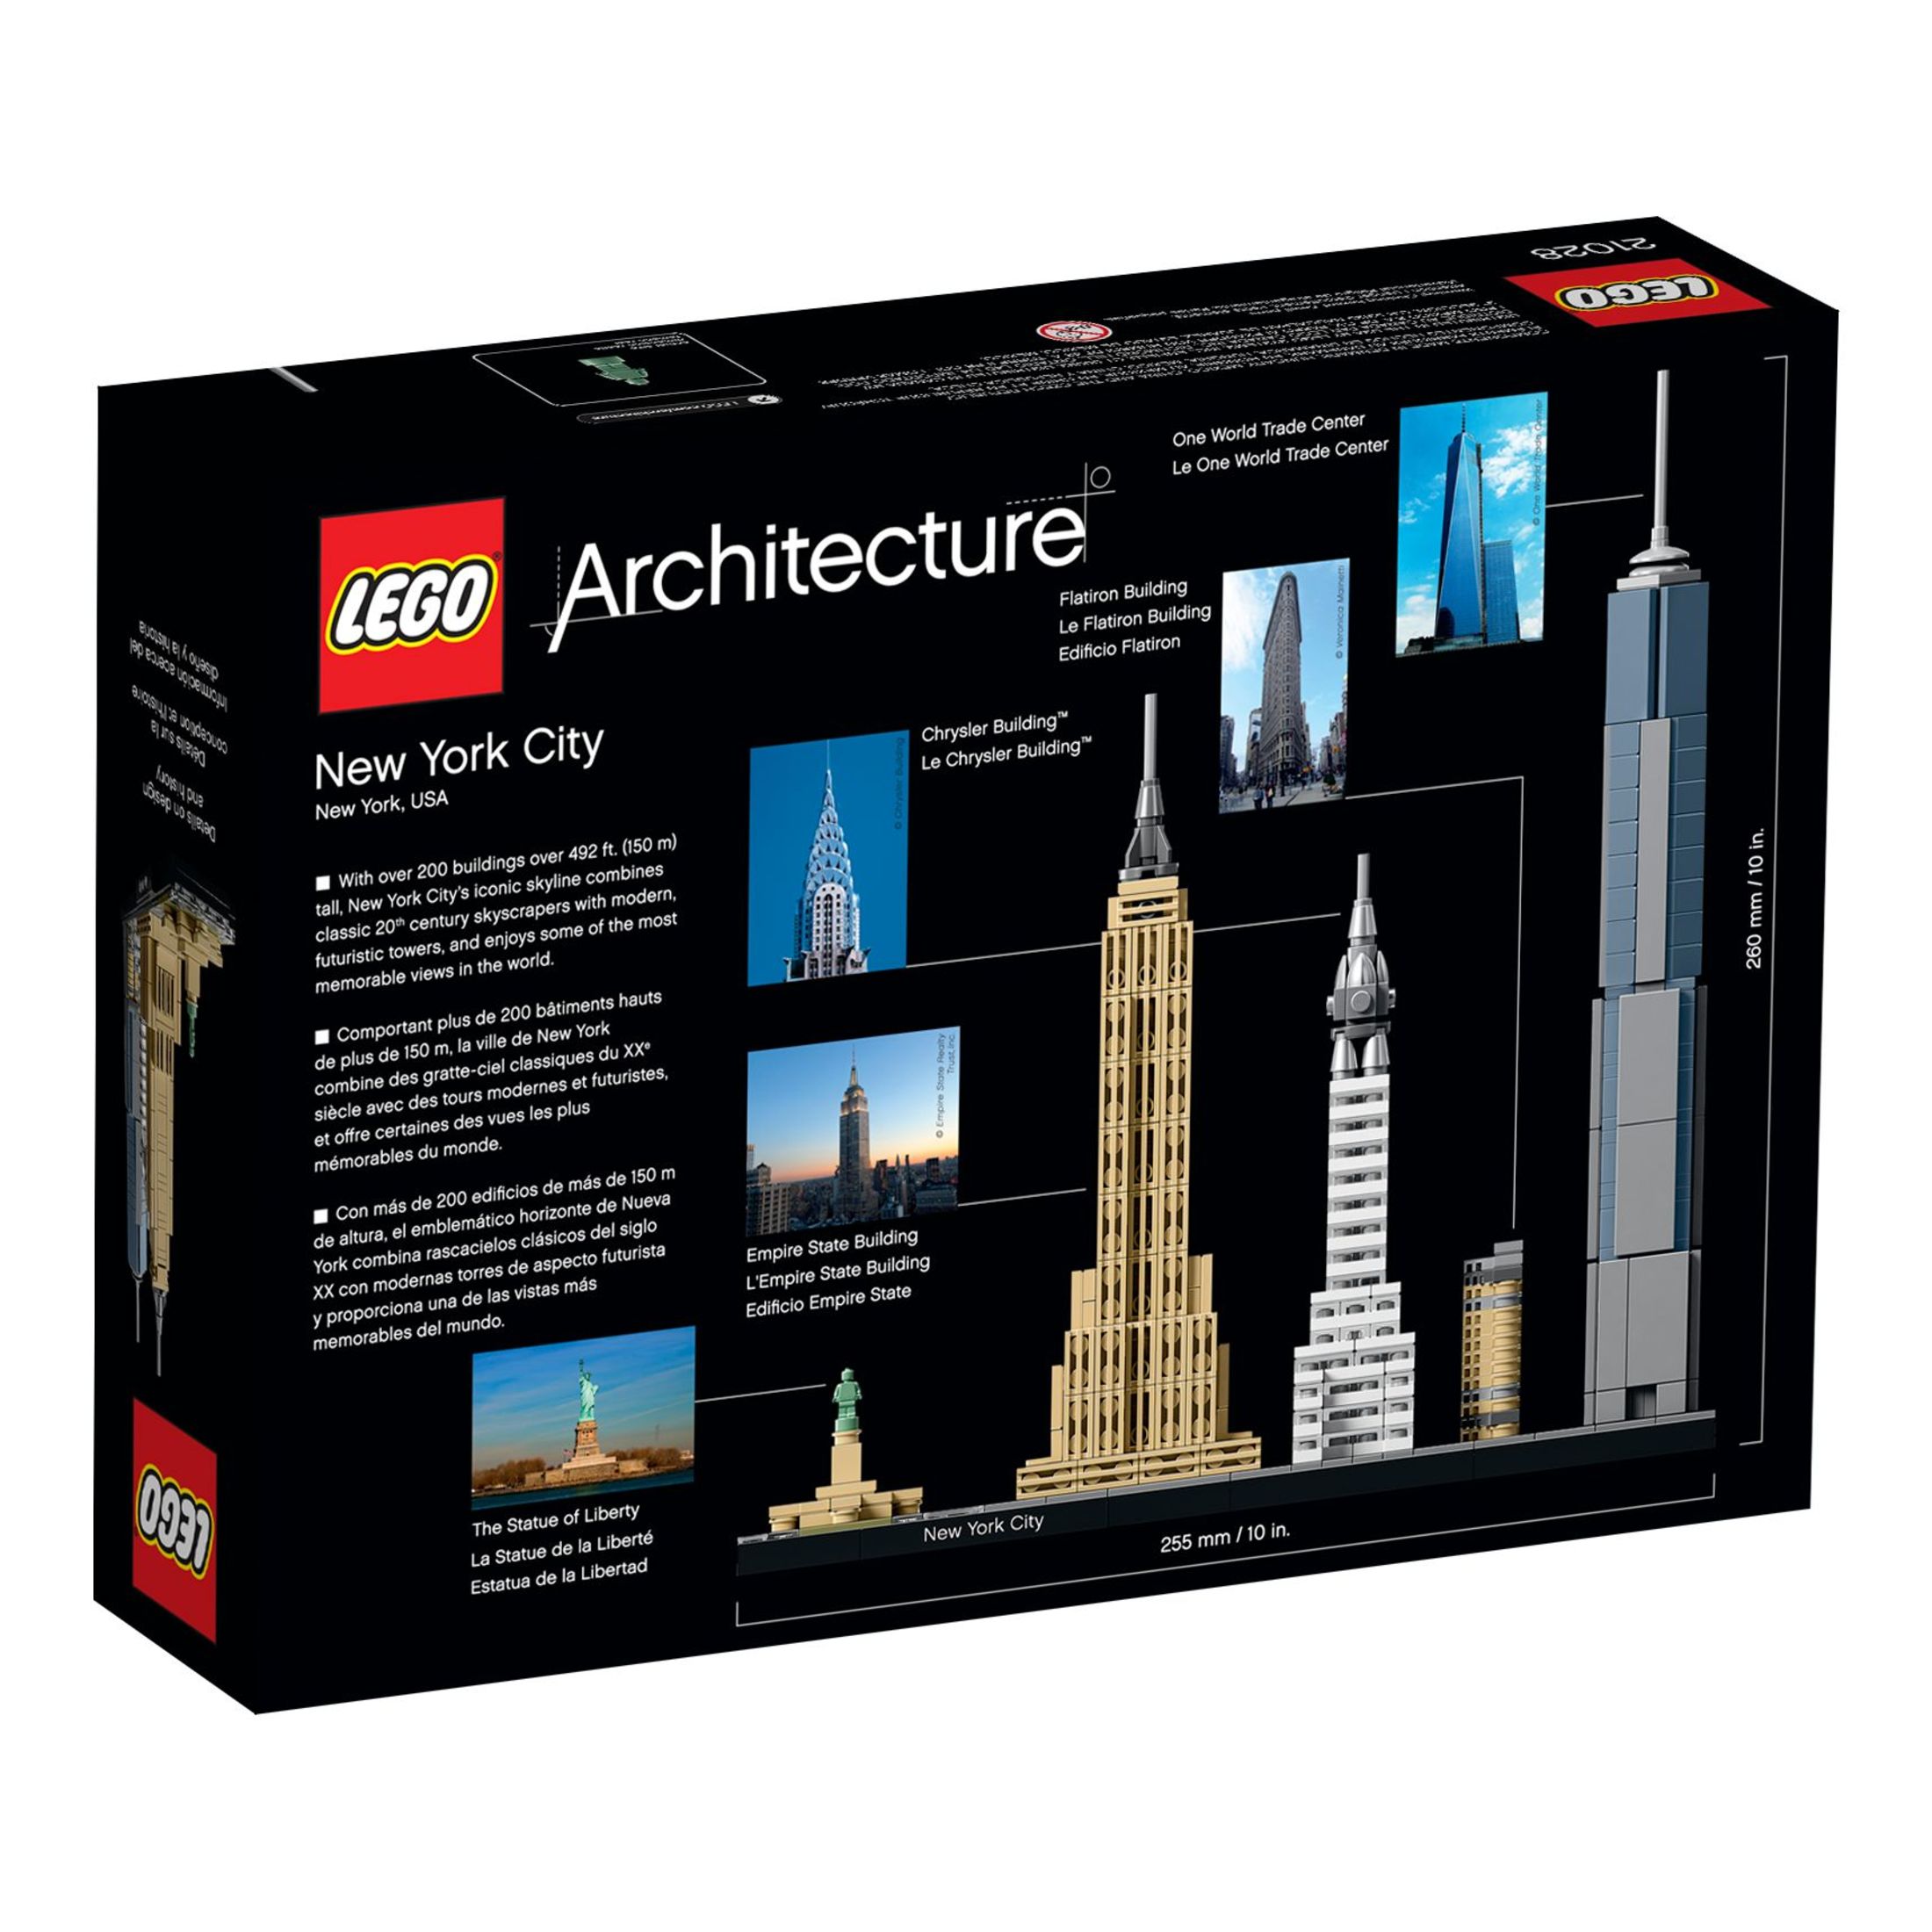 LEGO Architecture New York City Skyline 21028, Collectible Model Kit for Adults to Build, Creative Activity, Home Décor Gift Idea - image 5 of 5